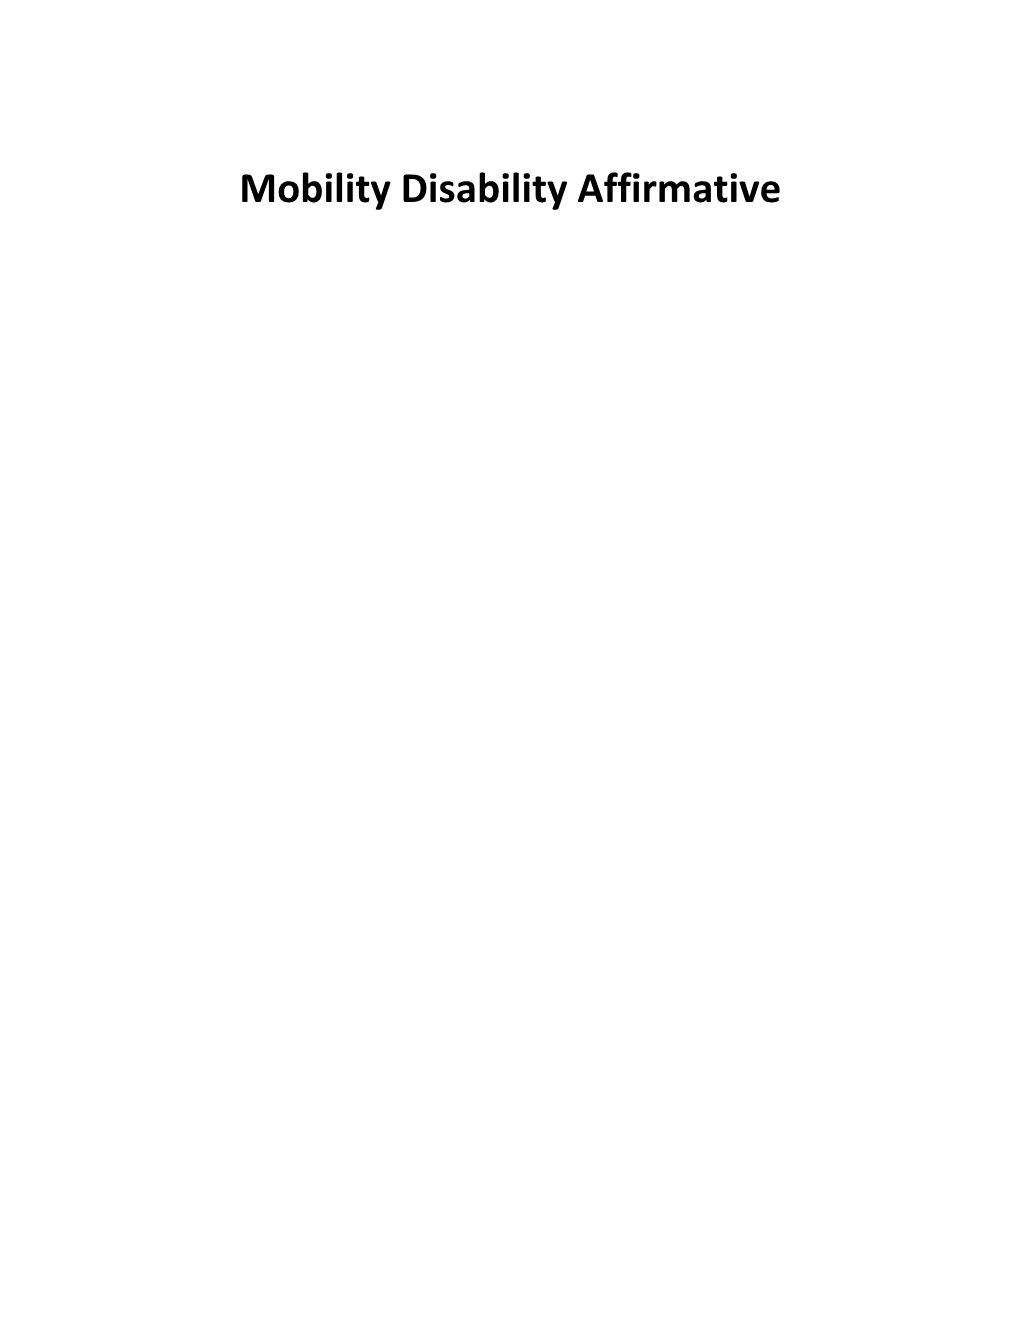 Mobility Disability Affirmative